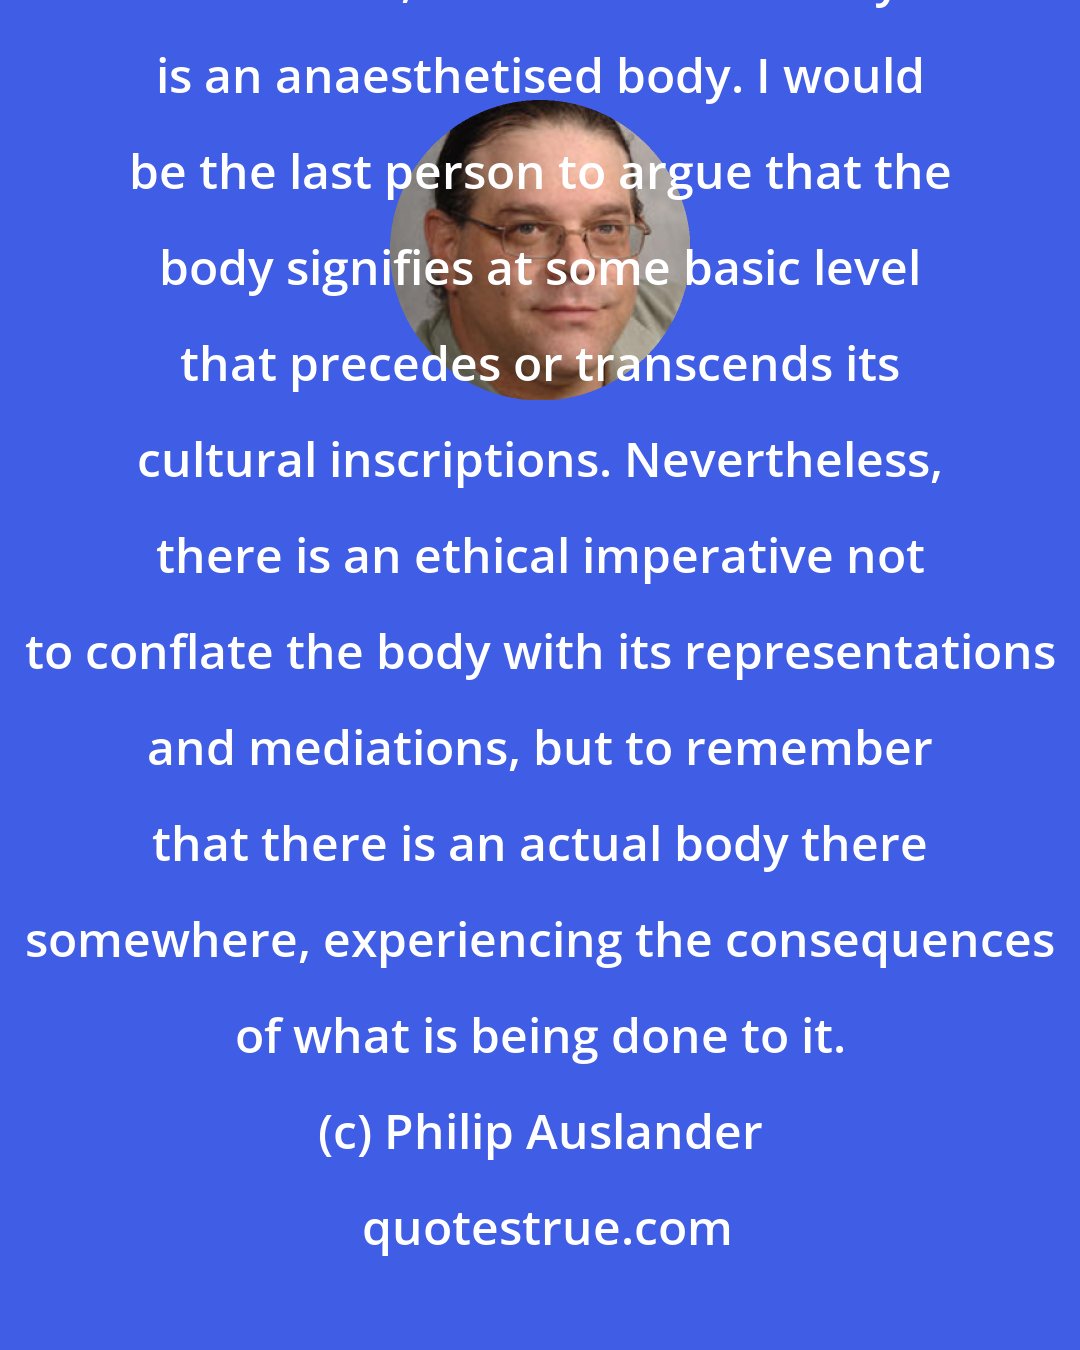 Philip Auslander: We need to remain alert to what happens to the body when it is mediatised. Too often, the mediatised body is an anaesthetised body. I would be the last person to argue that the body signifies at some basic level that precedes or transcends its cultural inscriptions. Nevertheless, there is an ethical imperative not to conflate the body with its representations and mediations, but to remember that there is an actual body there somewhere, experiencing the consequences of what is being done to it.